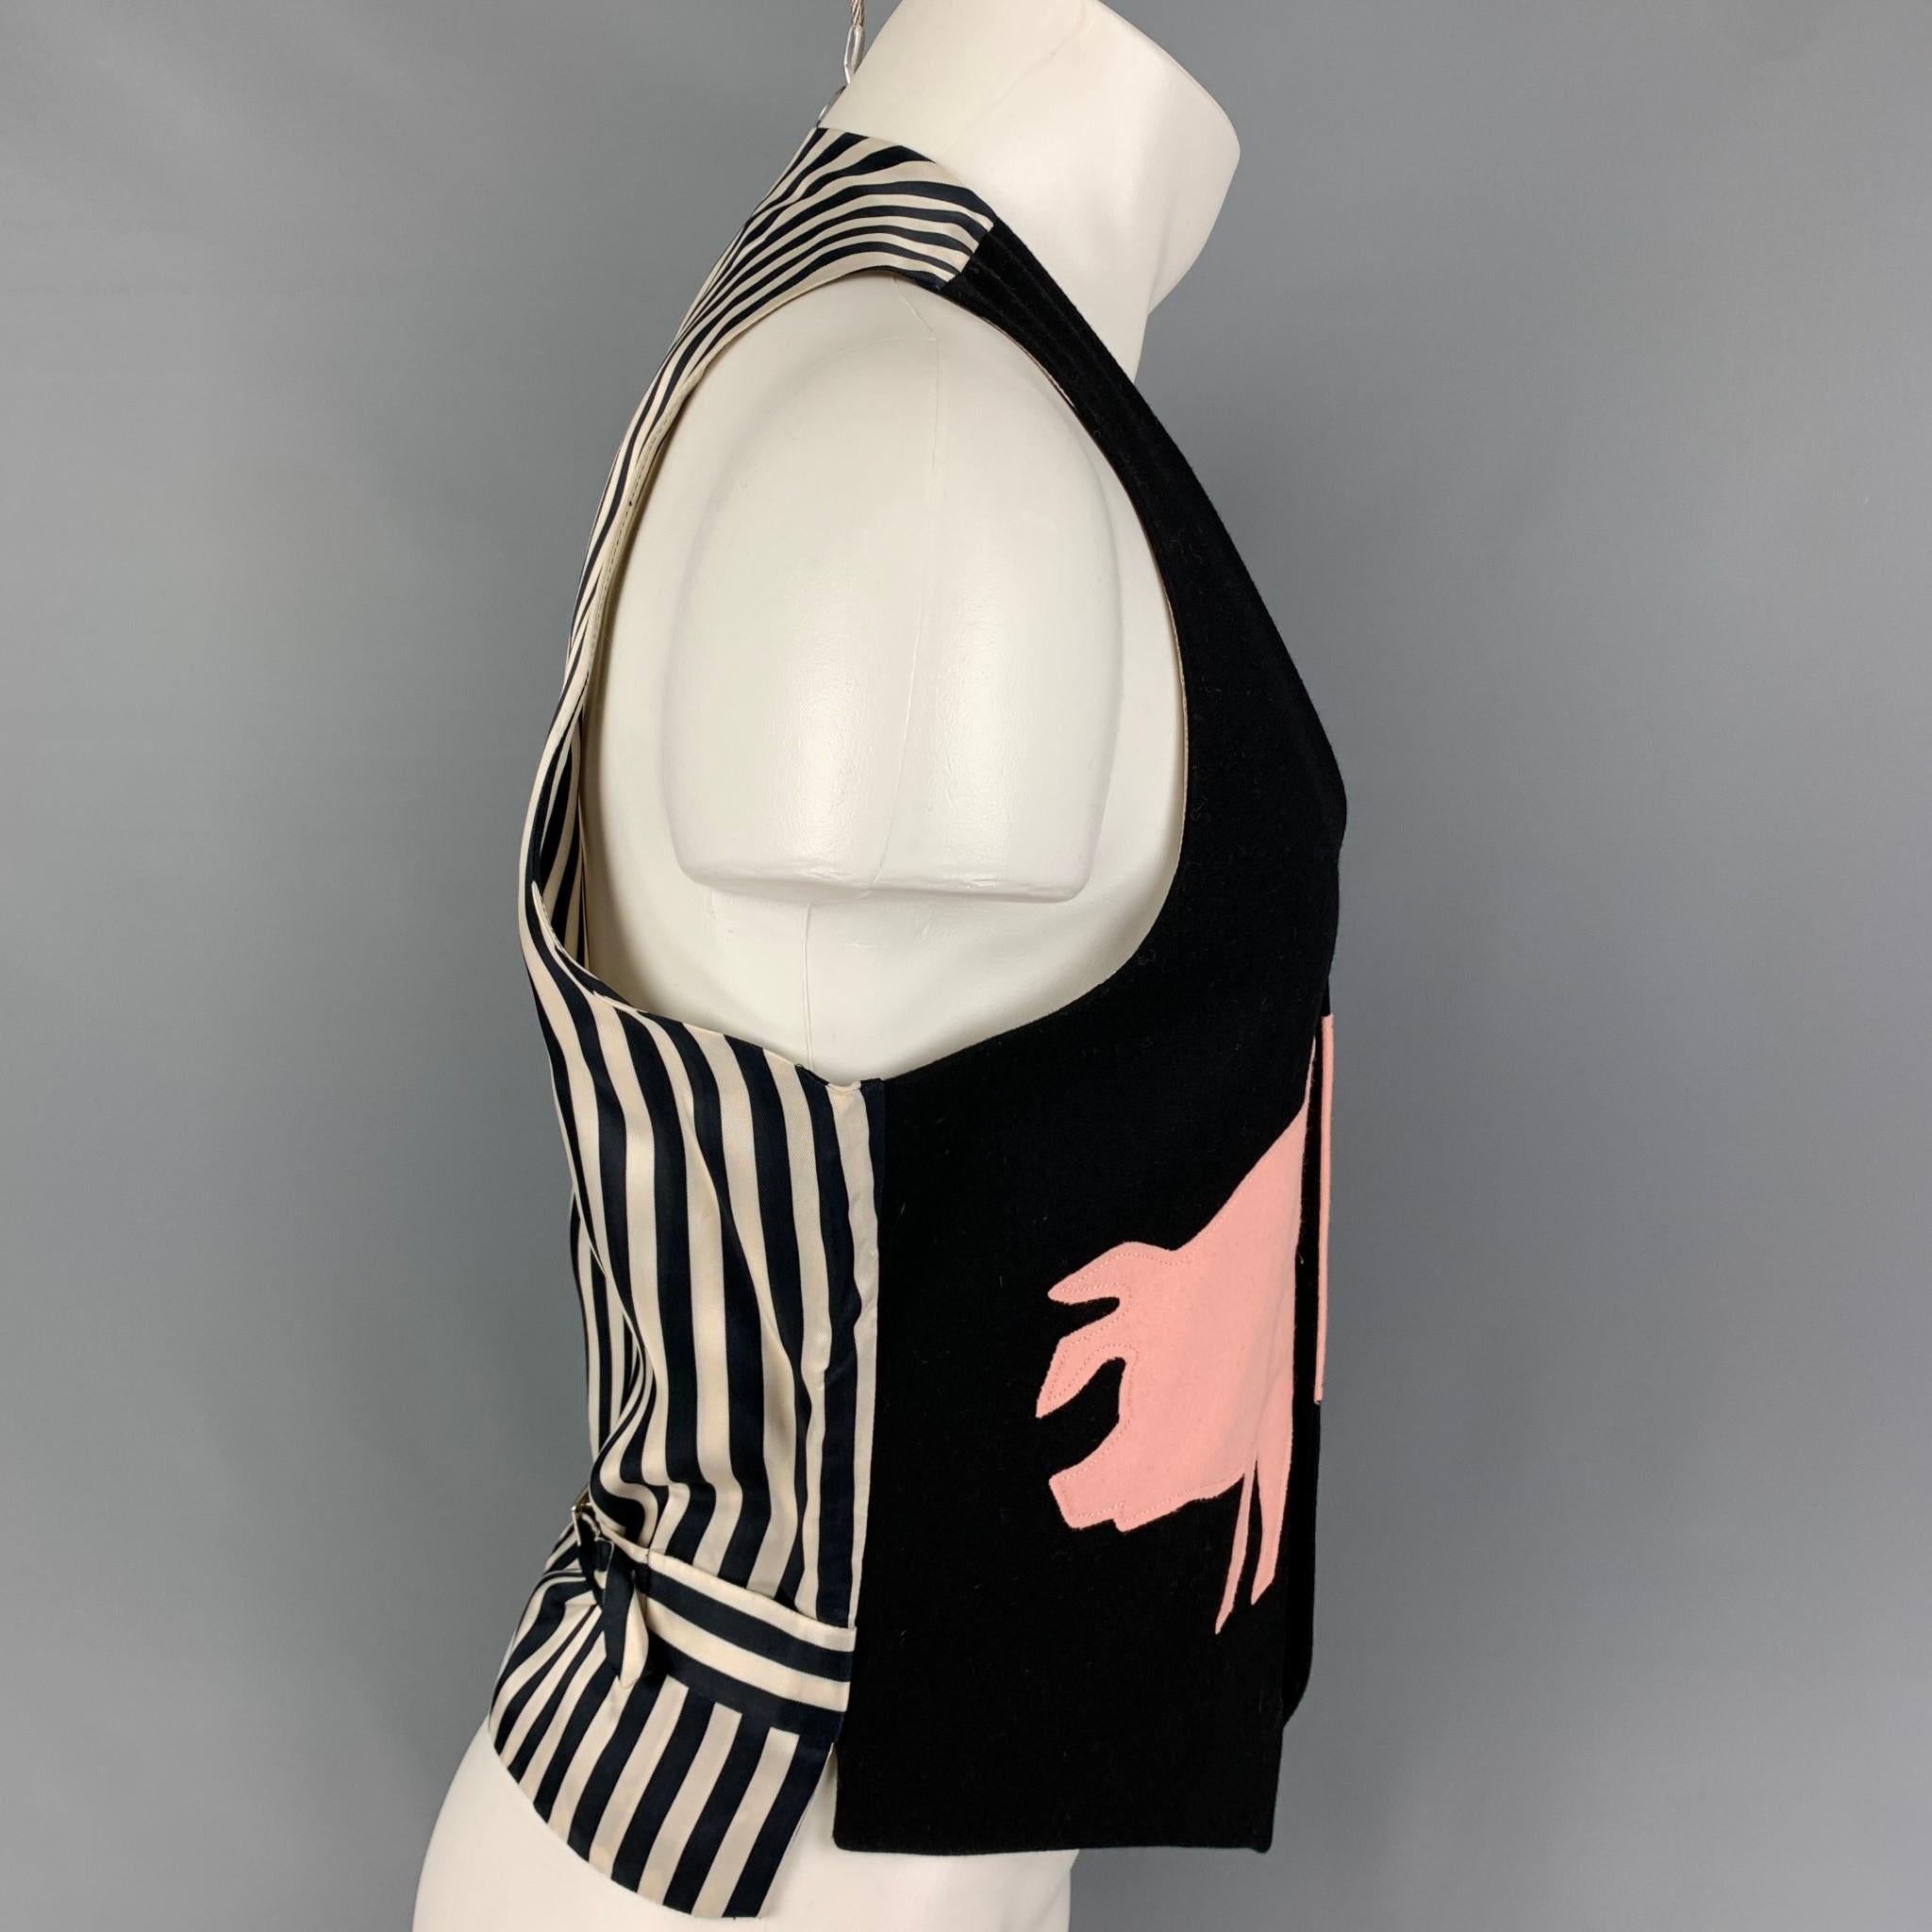 Vintage CHEAP an CHIC by MOSCHINO vest comes in a black & white wool / polyamide featuring a striped back, pink applique design, adjustable back strap, and a buttoned closure. Made in Italy. 

Very Good Pre-Owned Condition.
Marked: I 50 / E 50 / GB